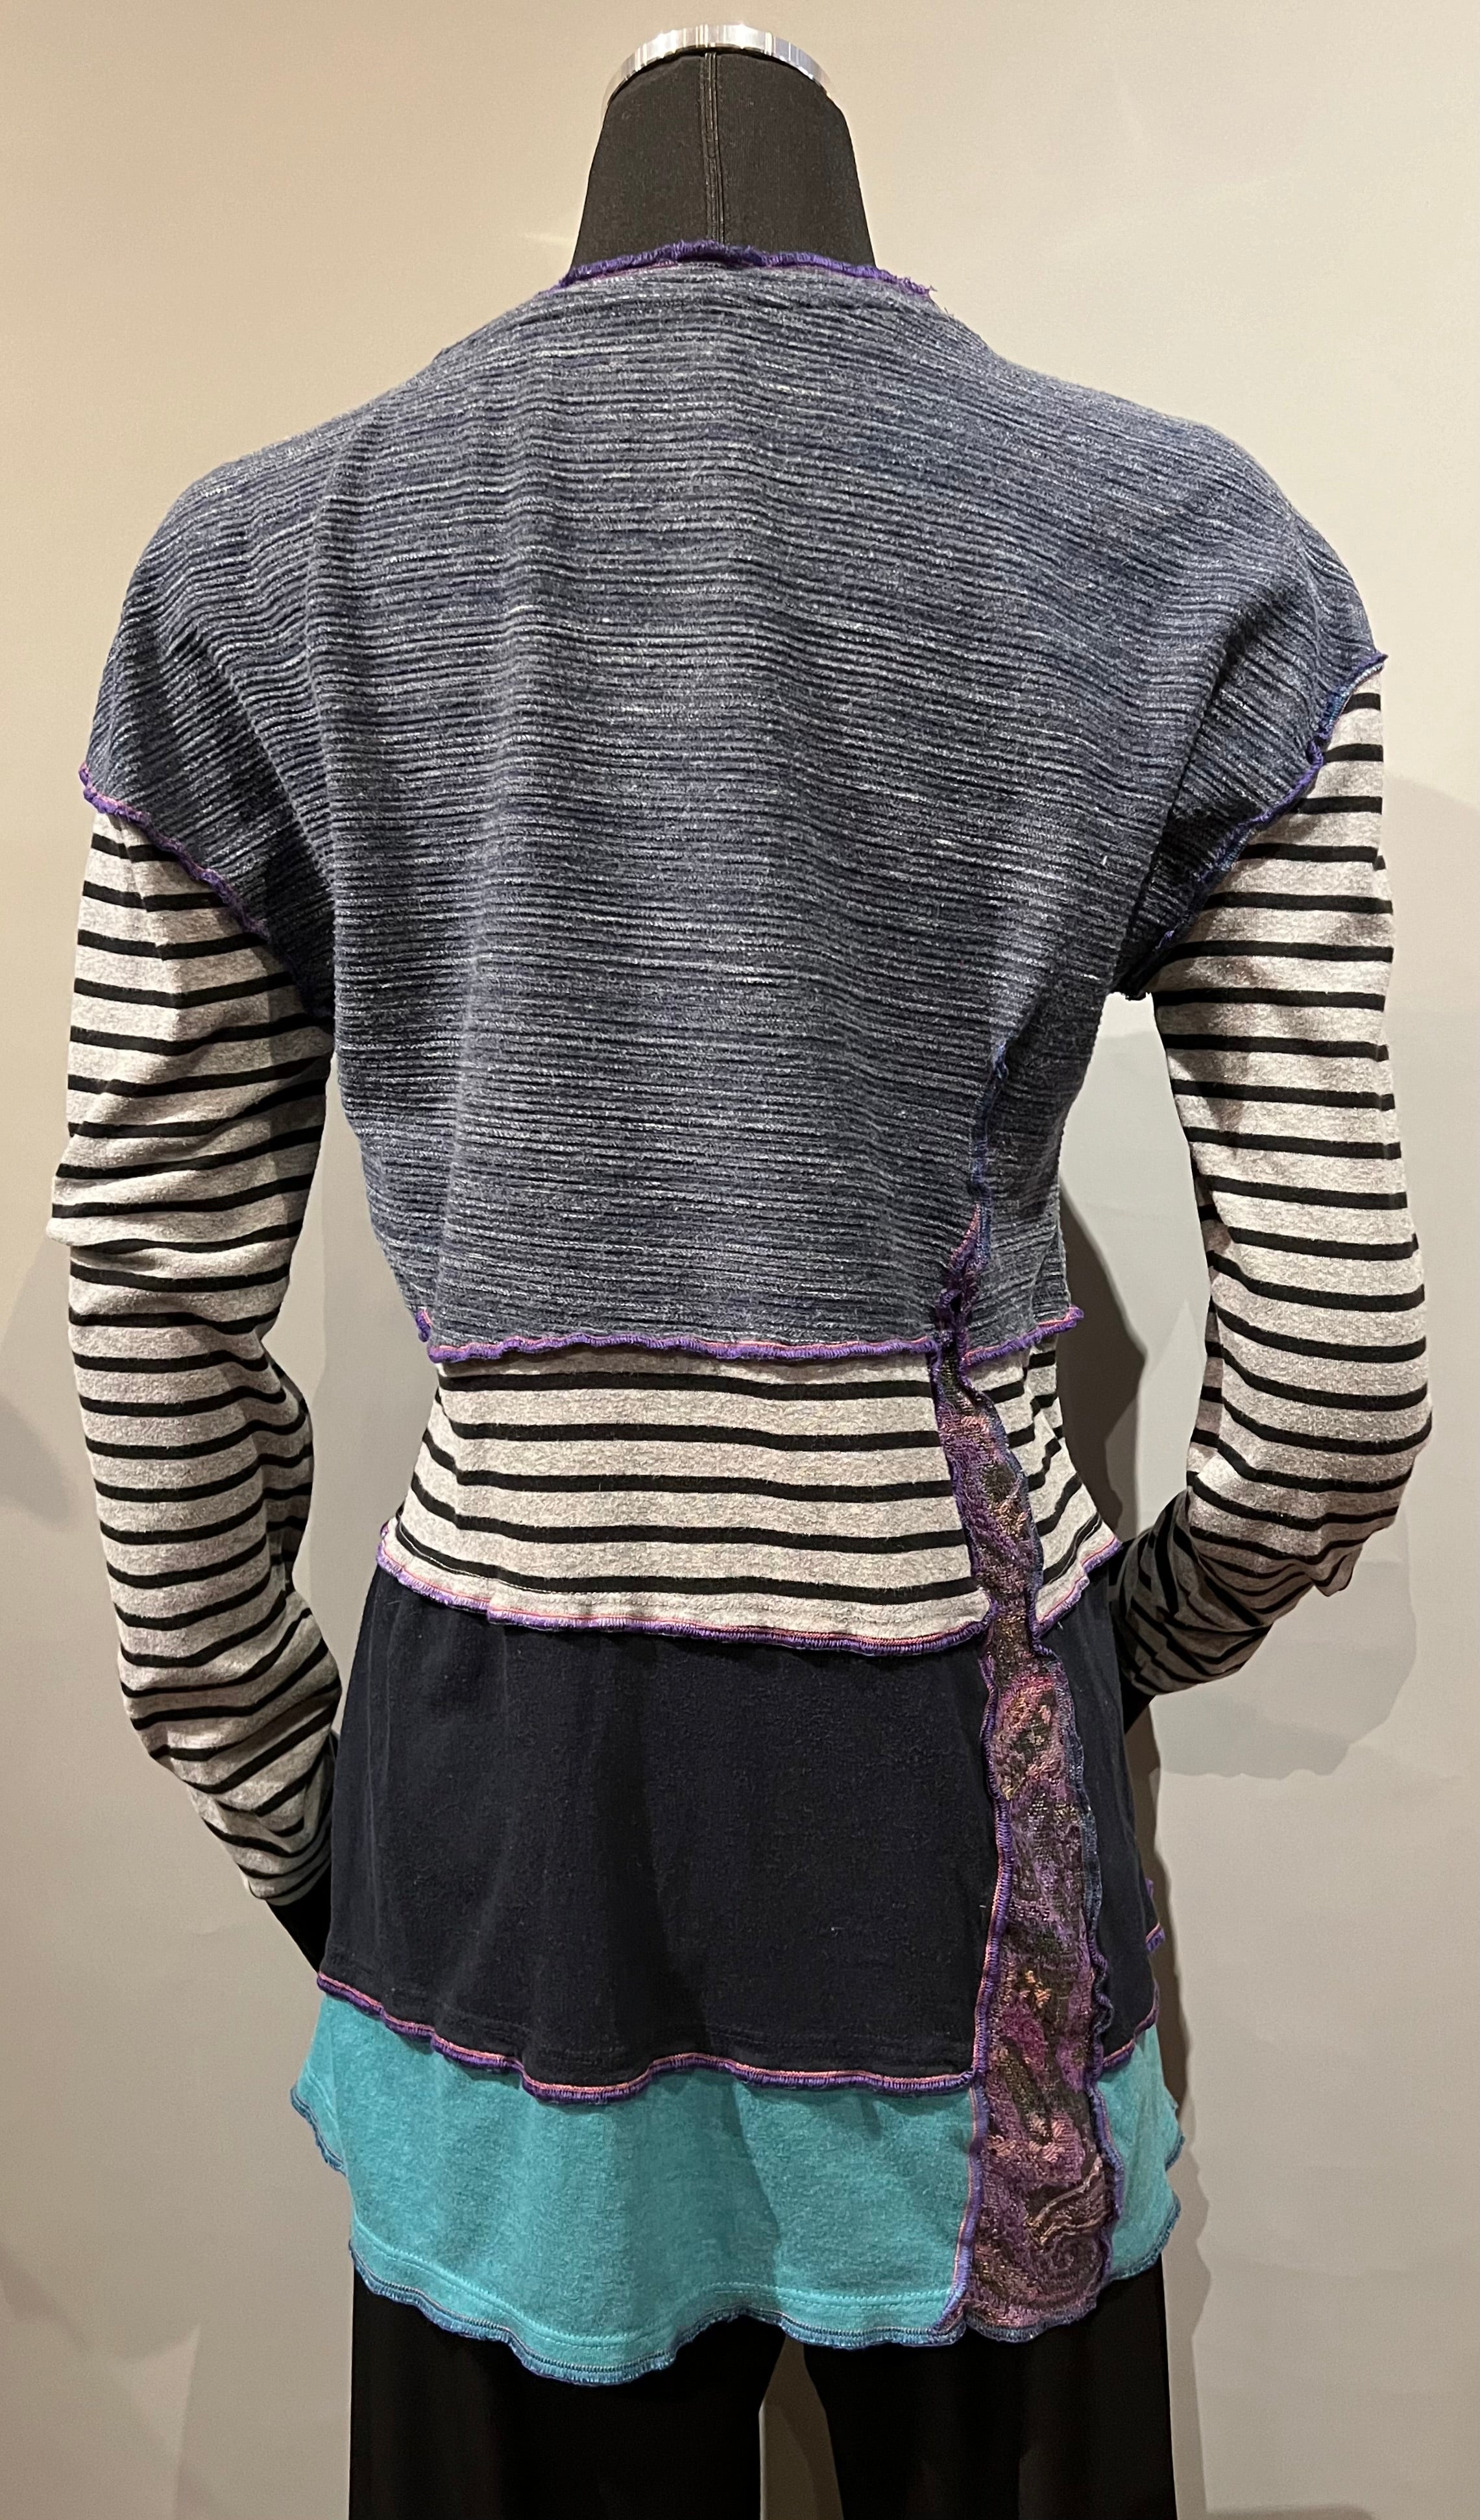 Rags 2 Riches (Size: M) Grey Teal Purple Black/White Striped Upcycled Knit Long Sleeve Layered Pullover Tunic Sweater